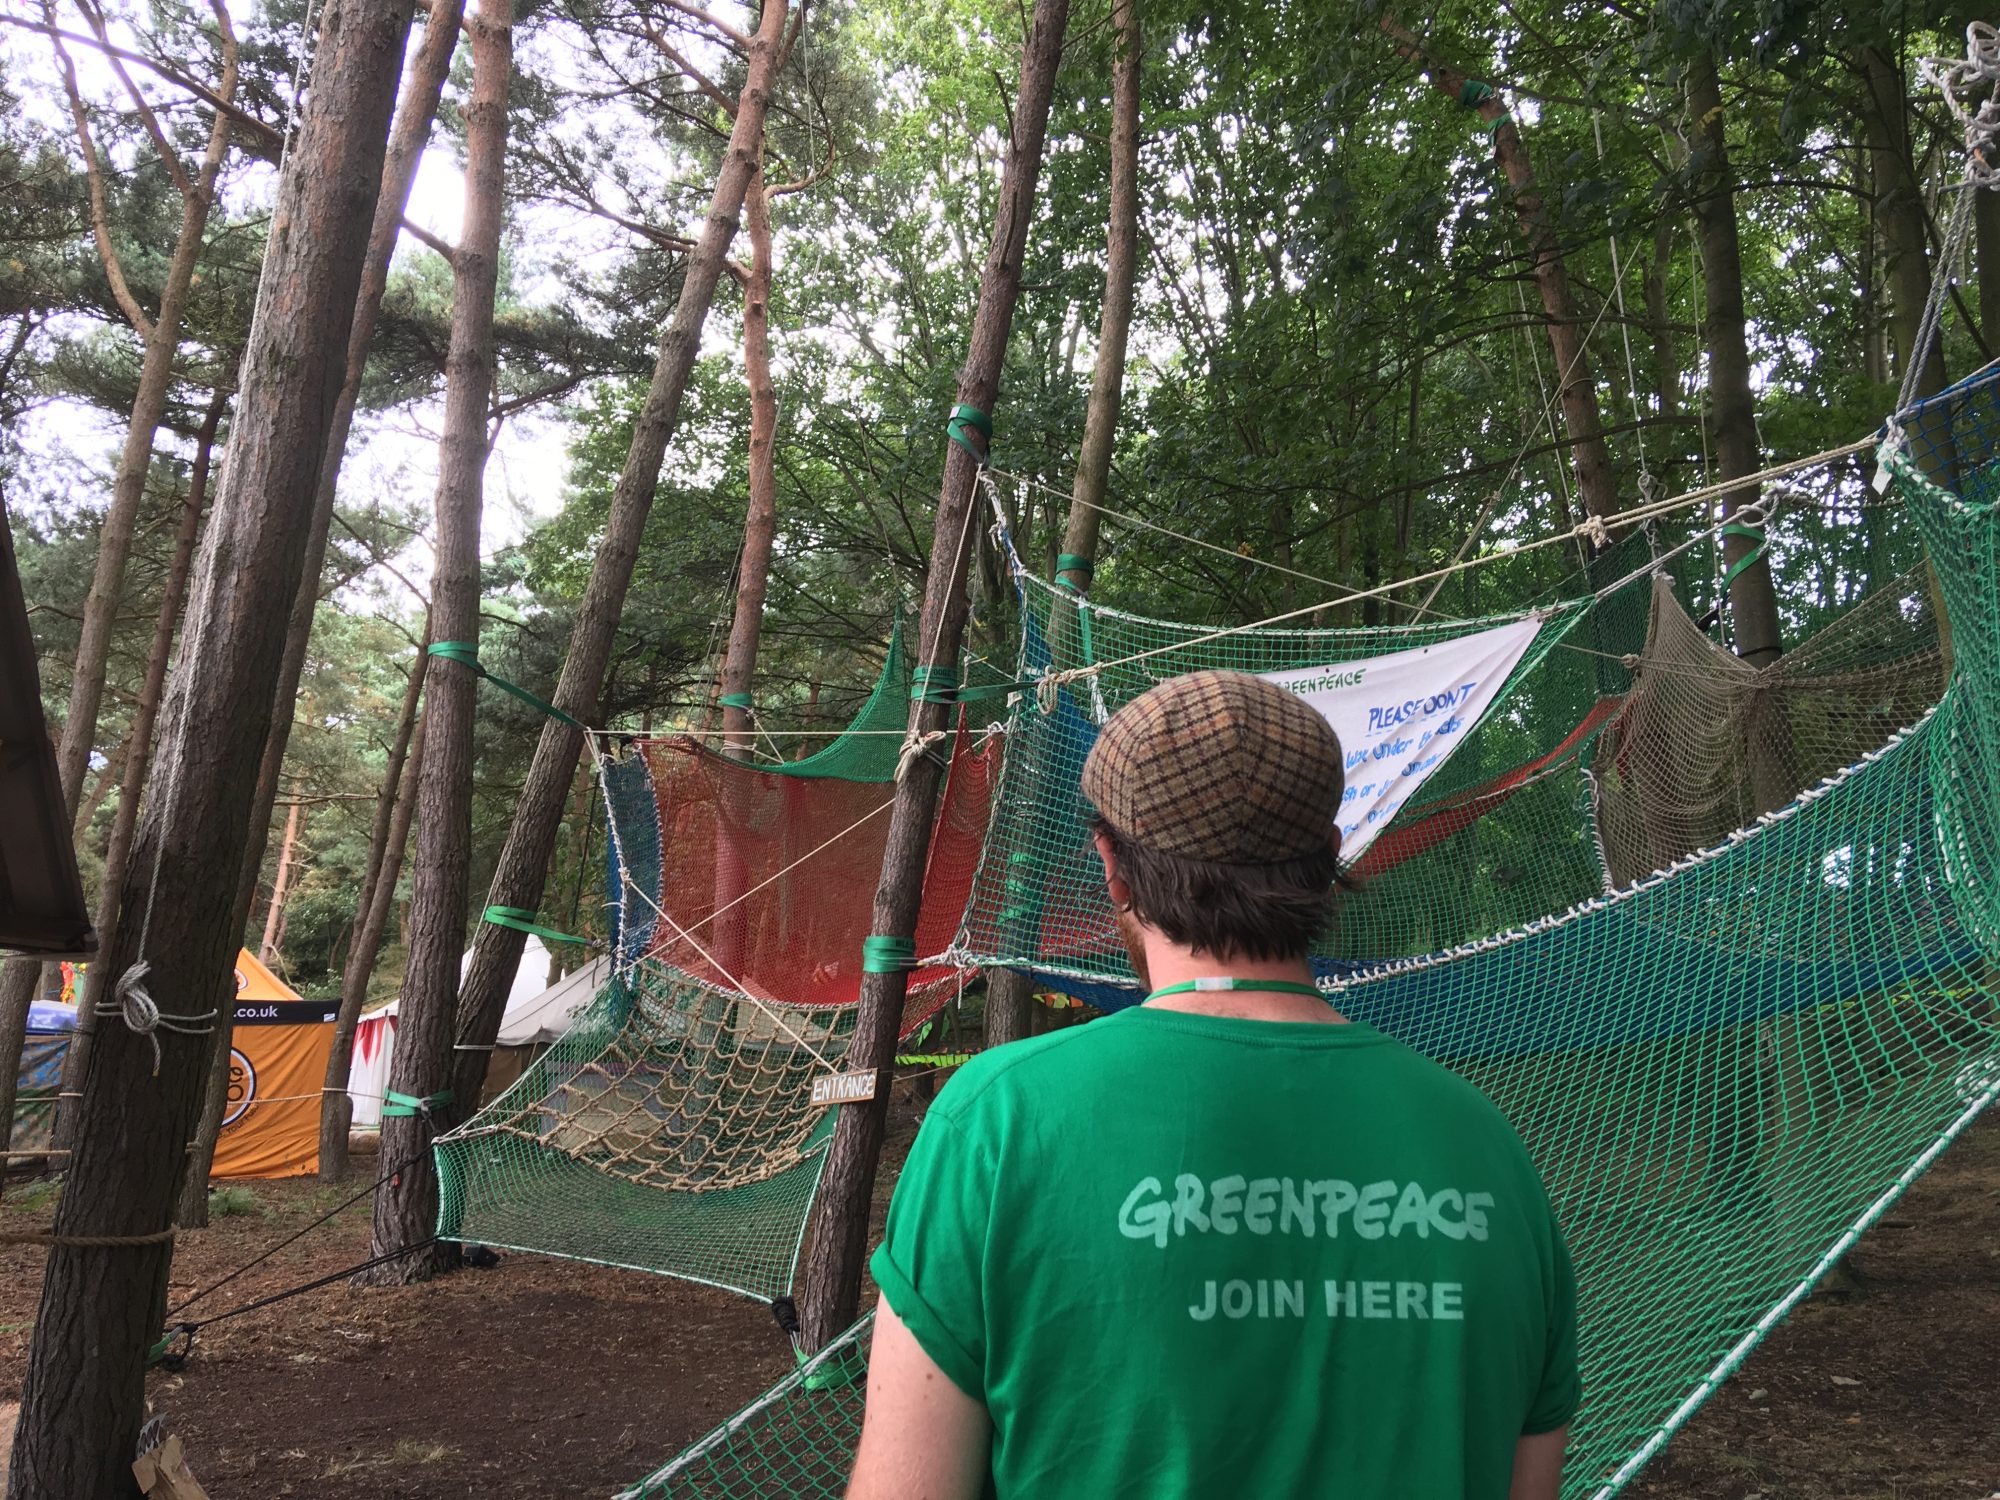 A Greenpeace volunteer stands in front of an obstacle course made of nets attached to trees